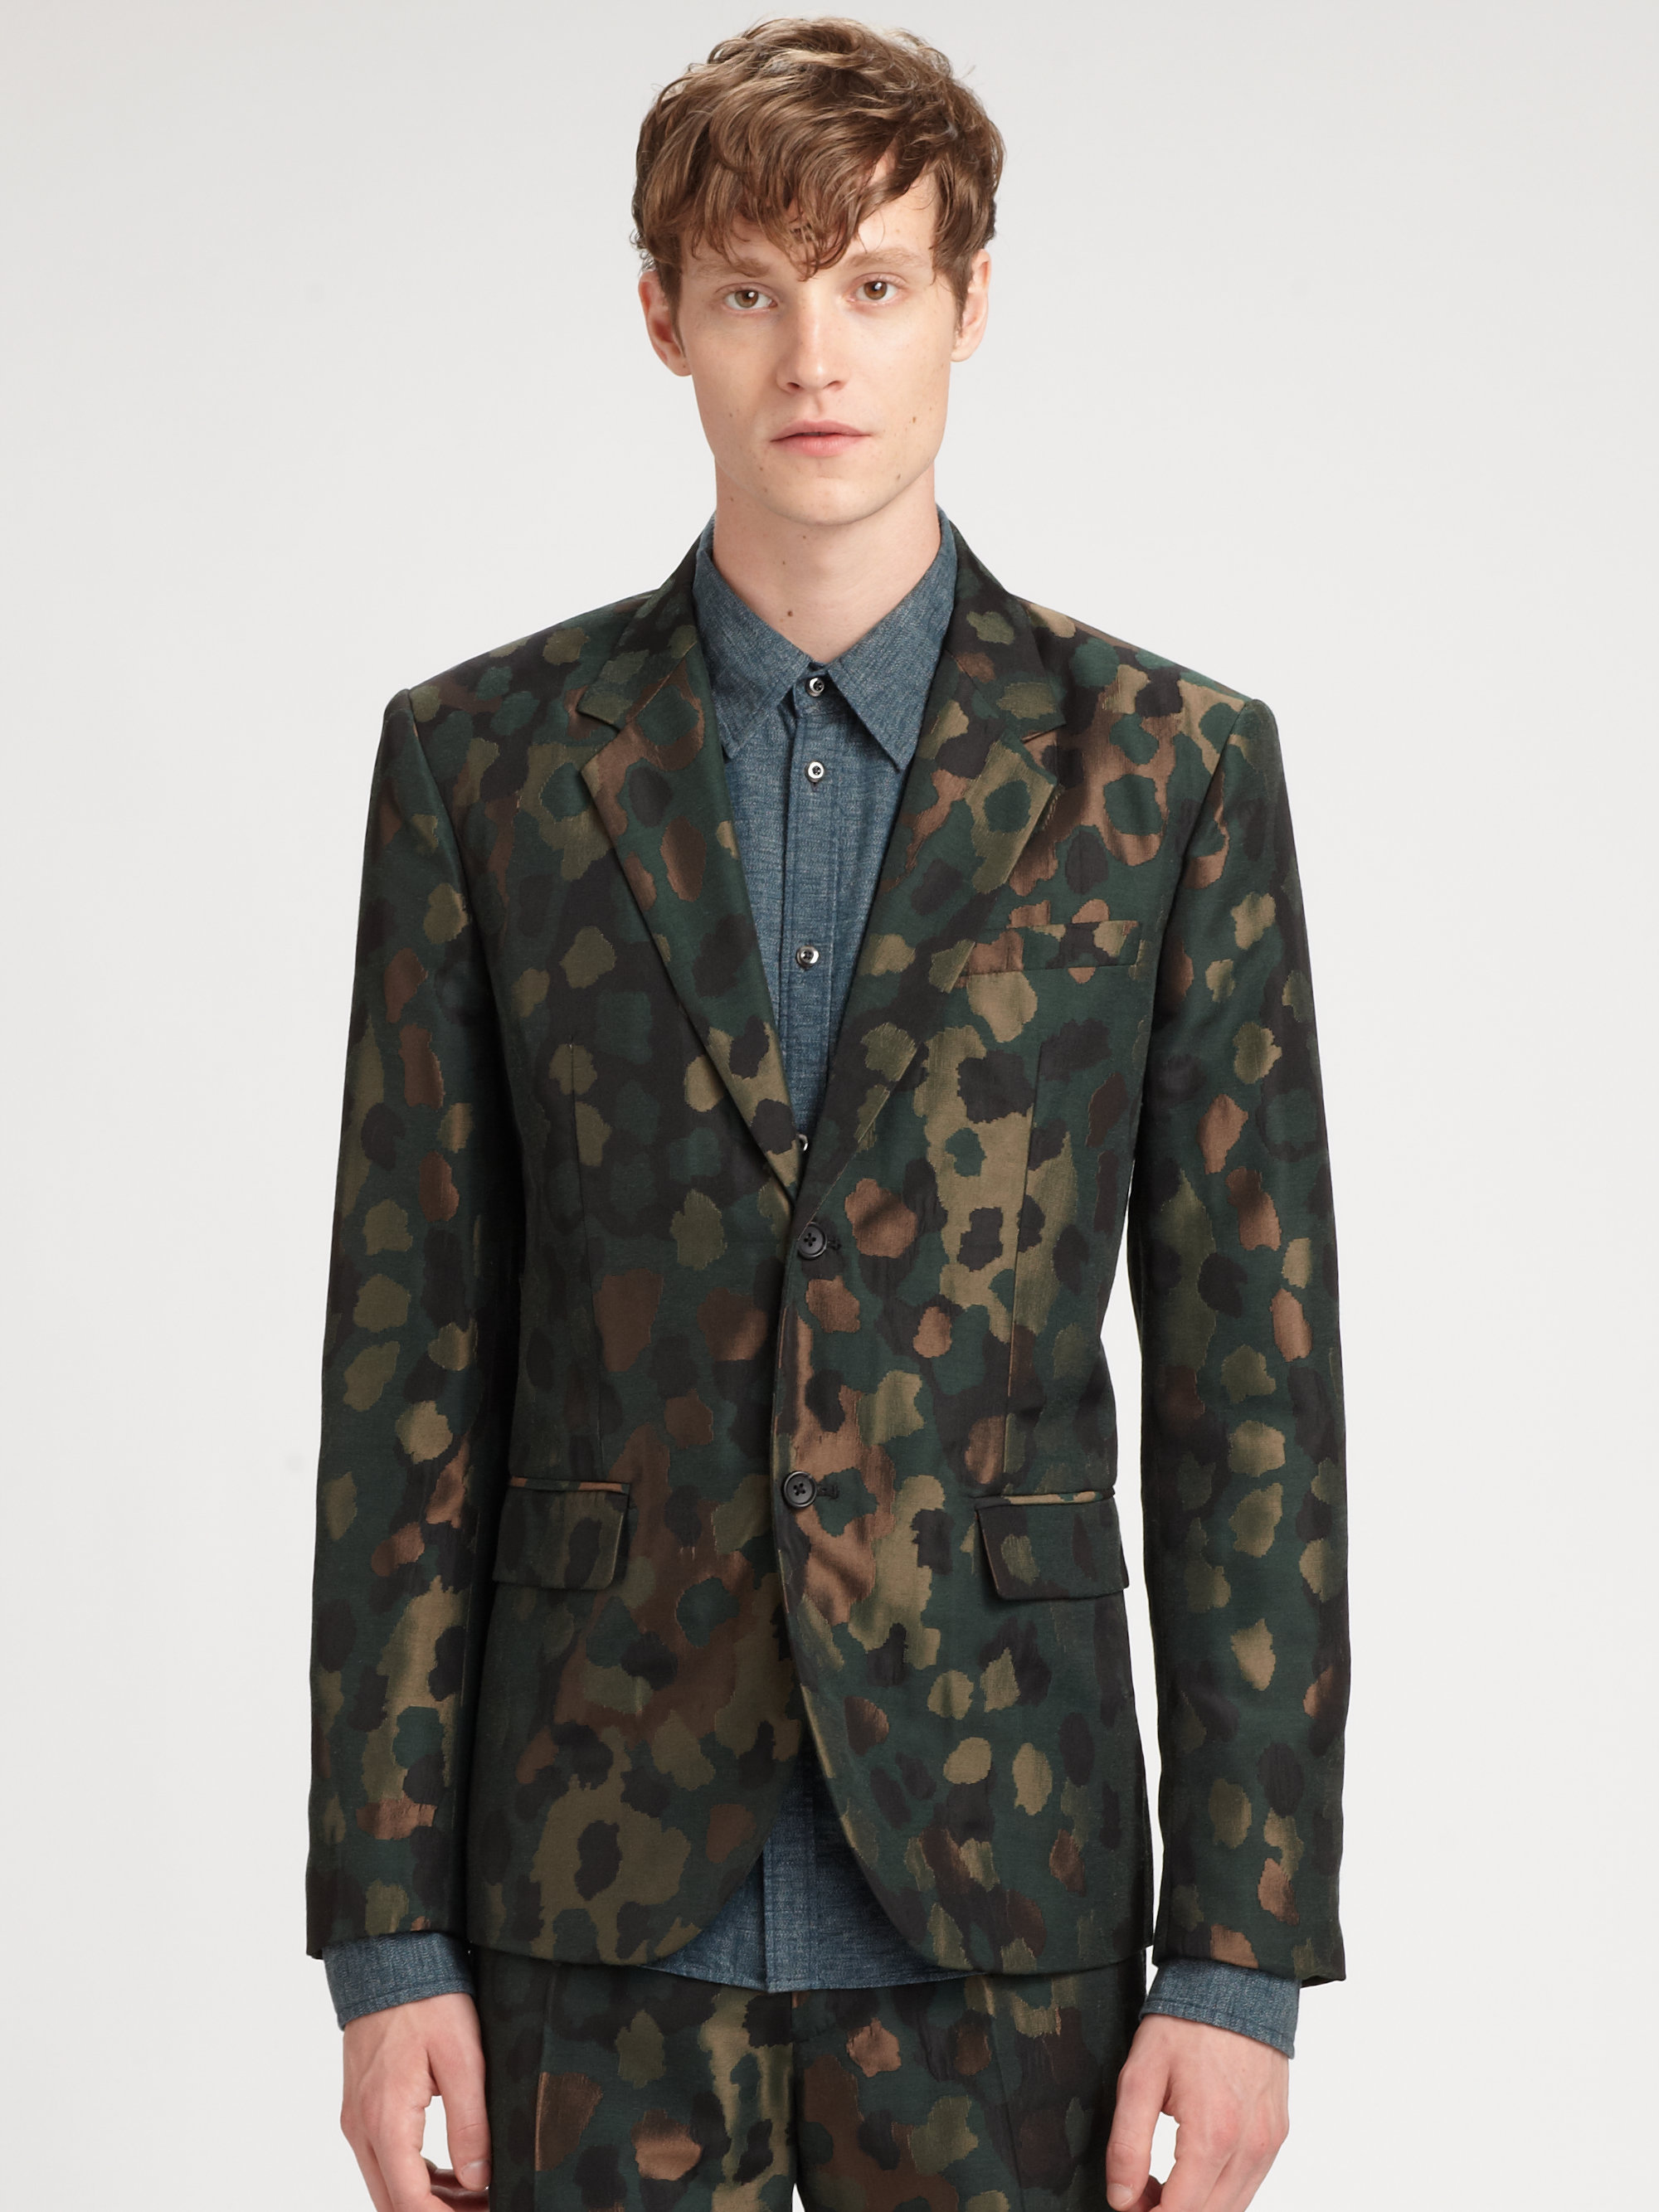 Marc by marc jacobs Monty Camo Jacquard Jacket in Green for Men | Lyst